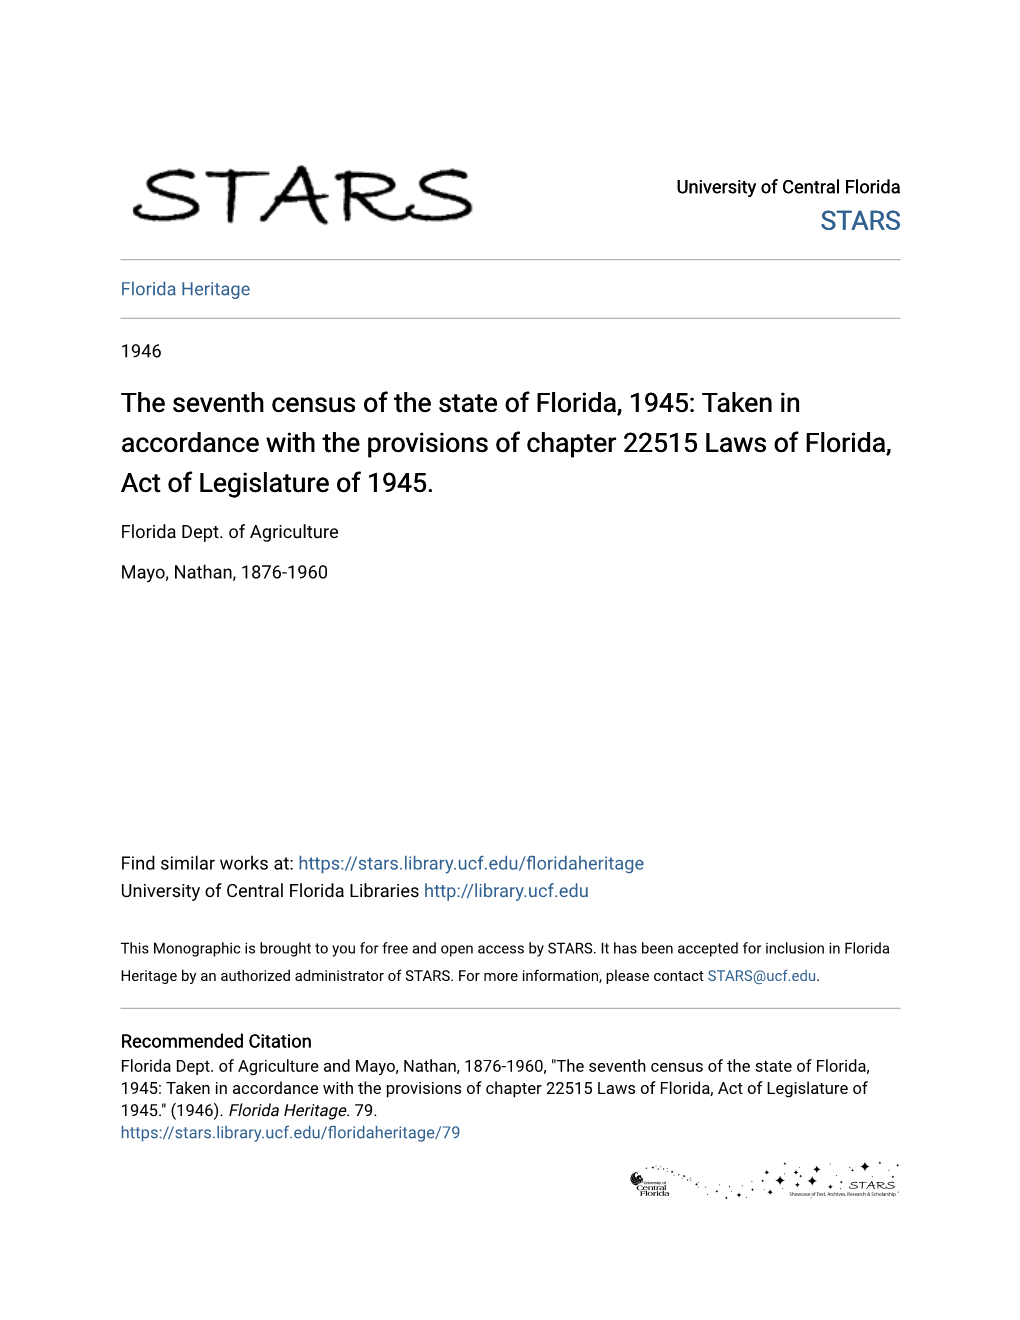 The Seventh Census of the State of Florida, 1945: Taken in Accordance with the Provisions of Chapter 22515 Laws of Florida, Act of Legislature of 1945